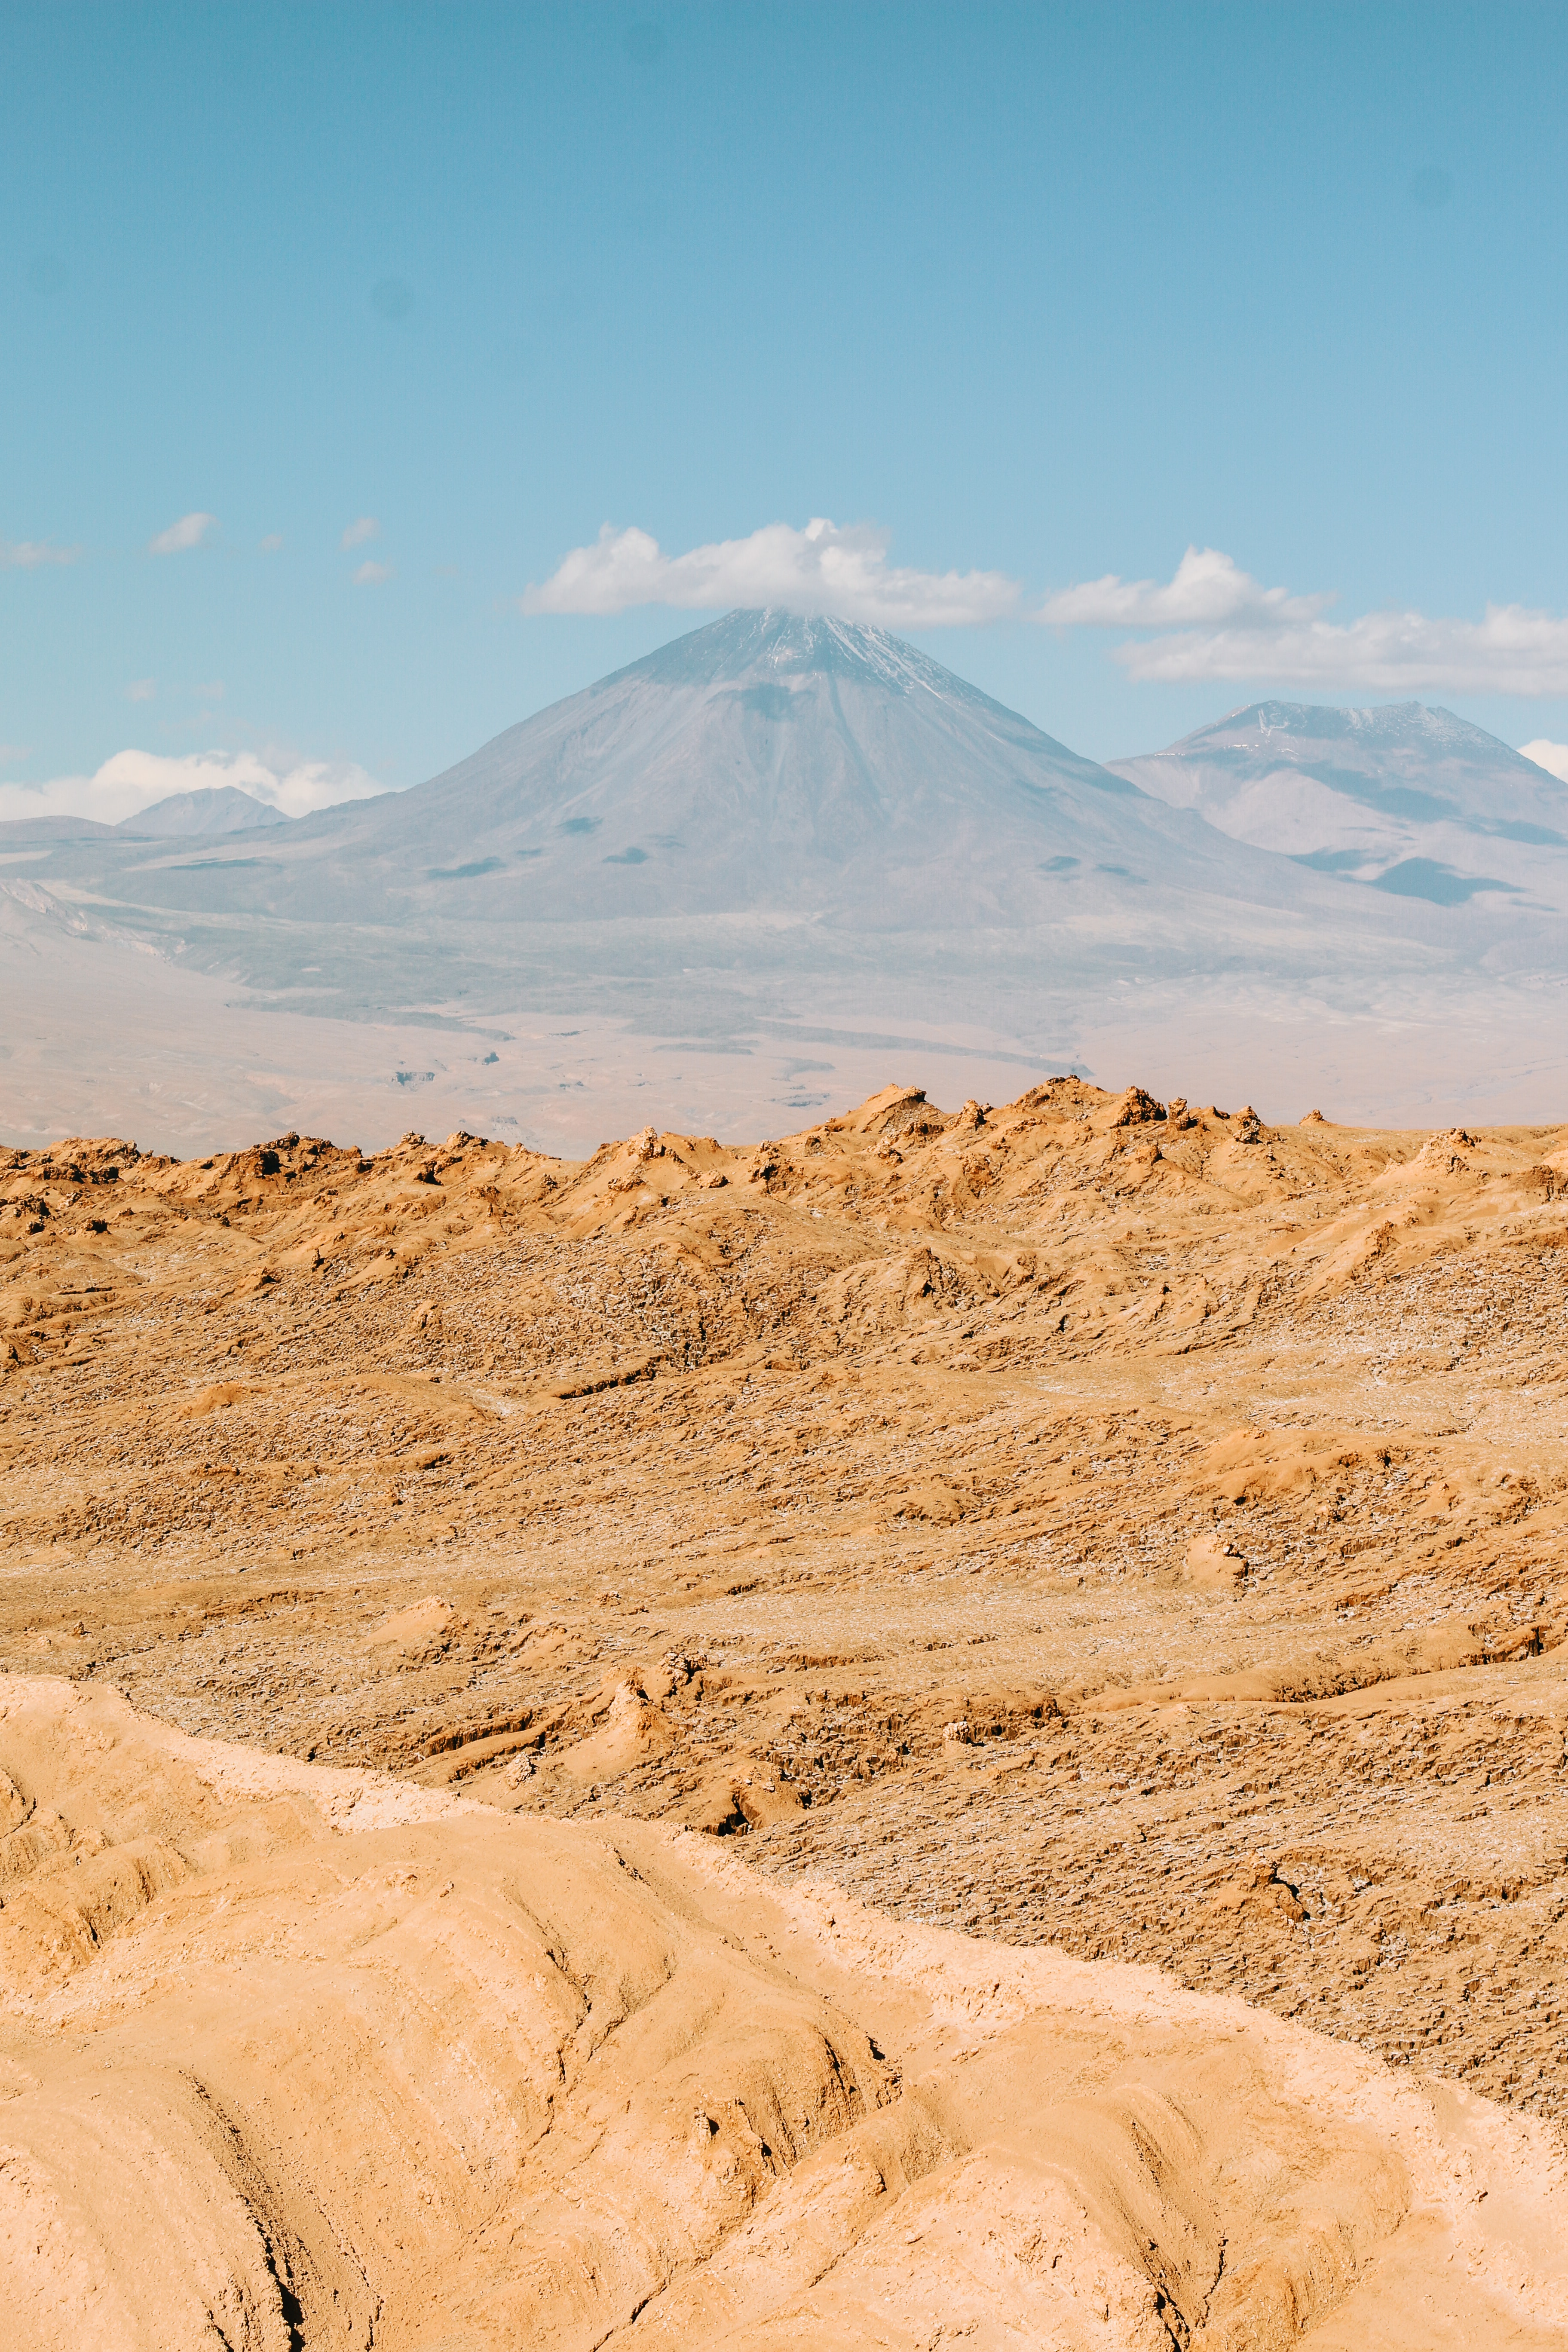 wallpapers nature, volcano, landscape, mountains, clouds, desert